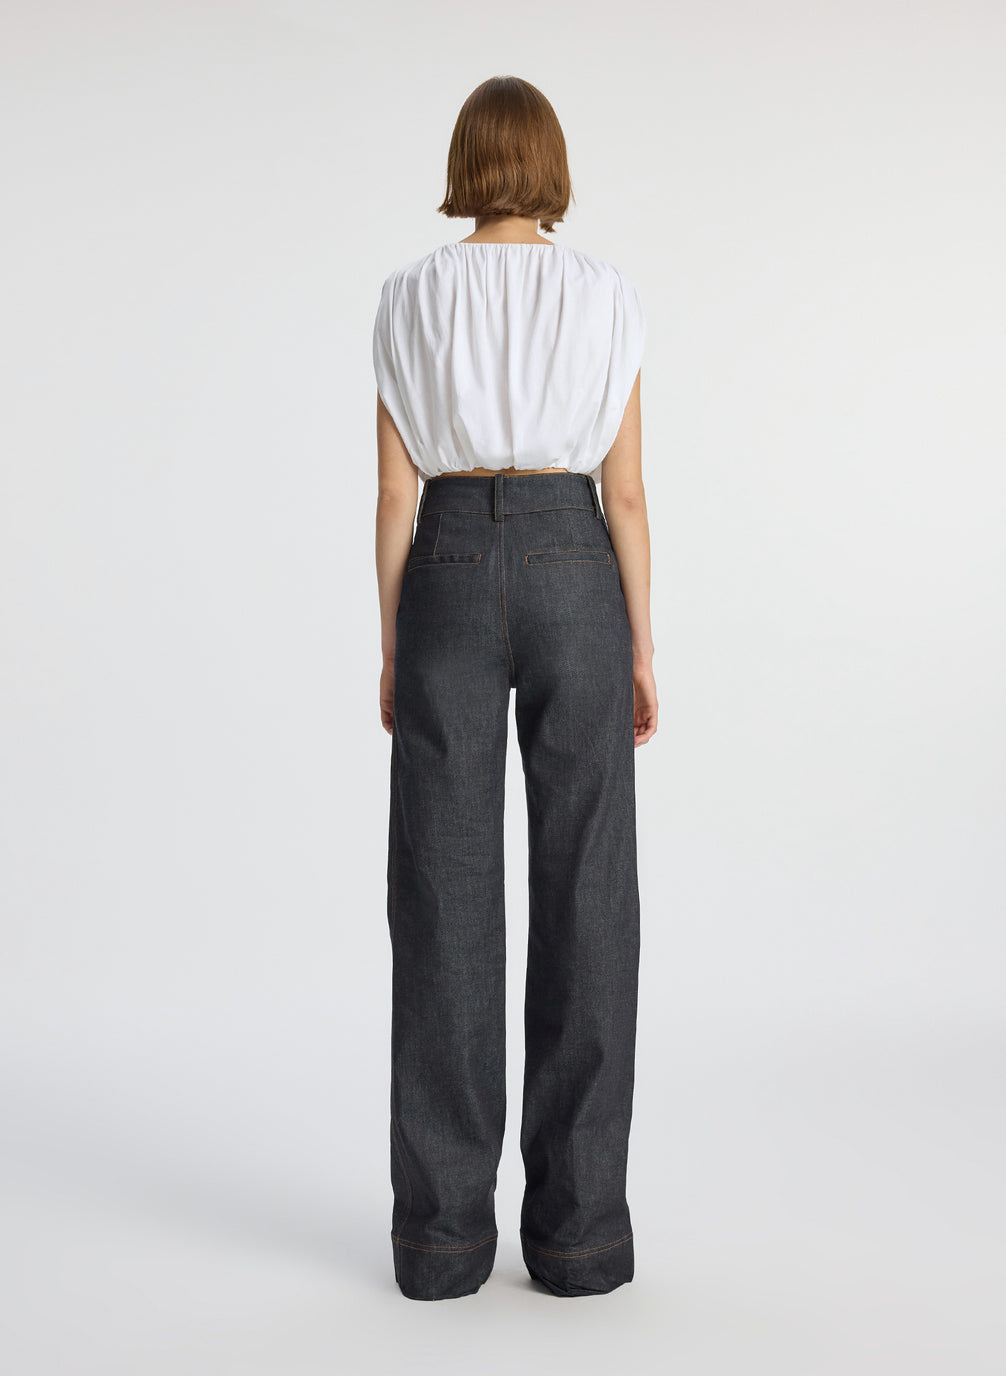 back view of woman wearing white cropped sleeveless top and raw denim jeans